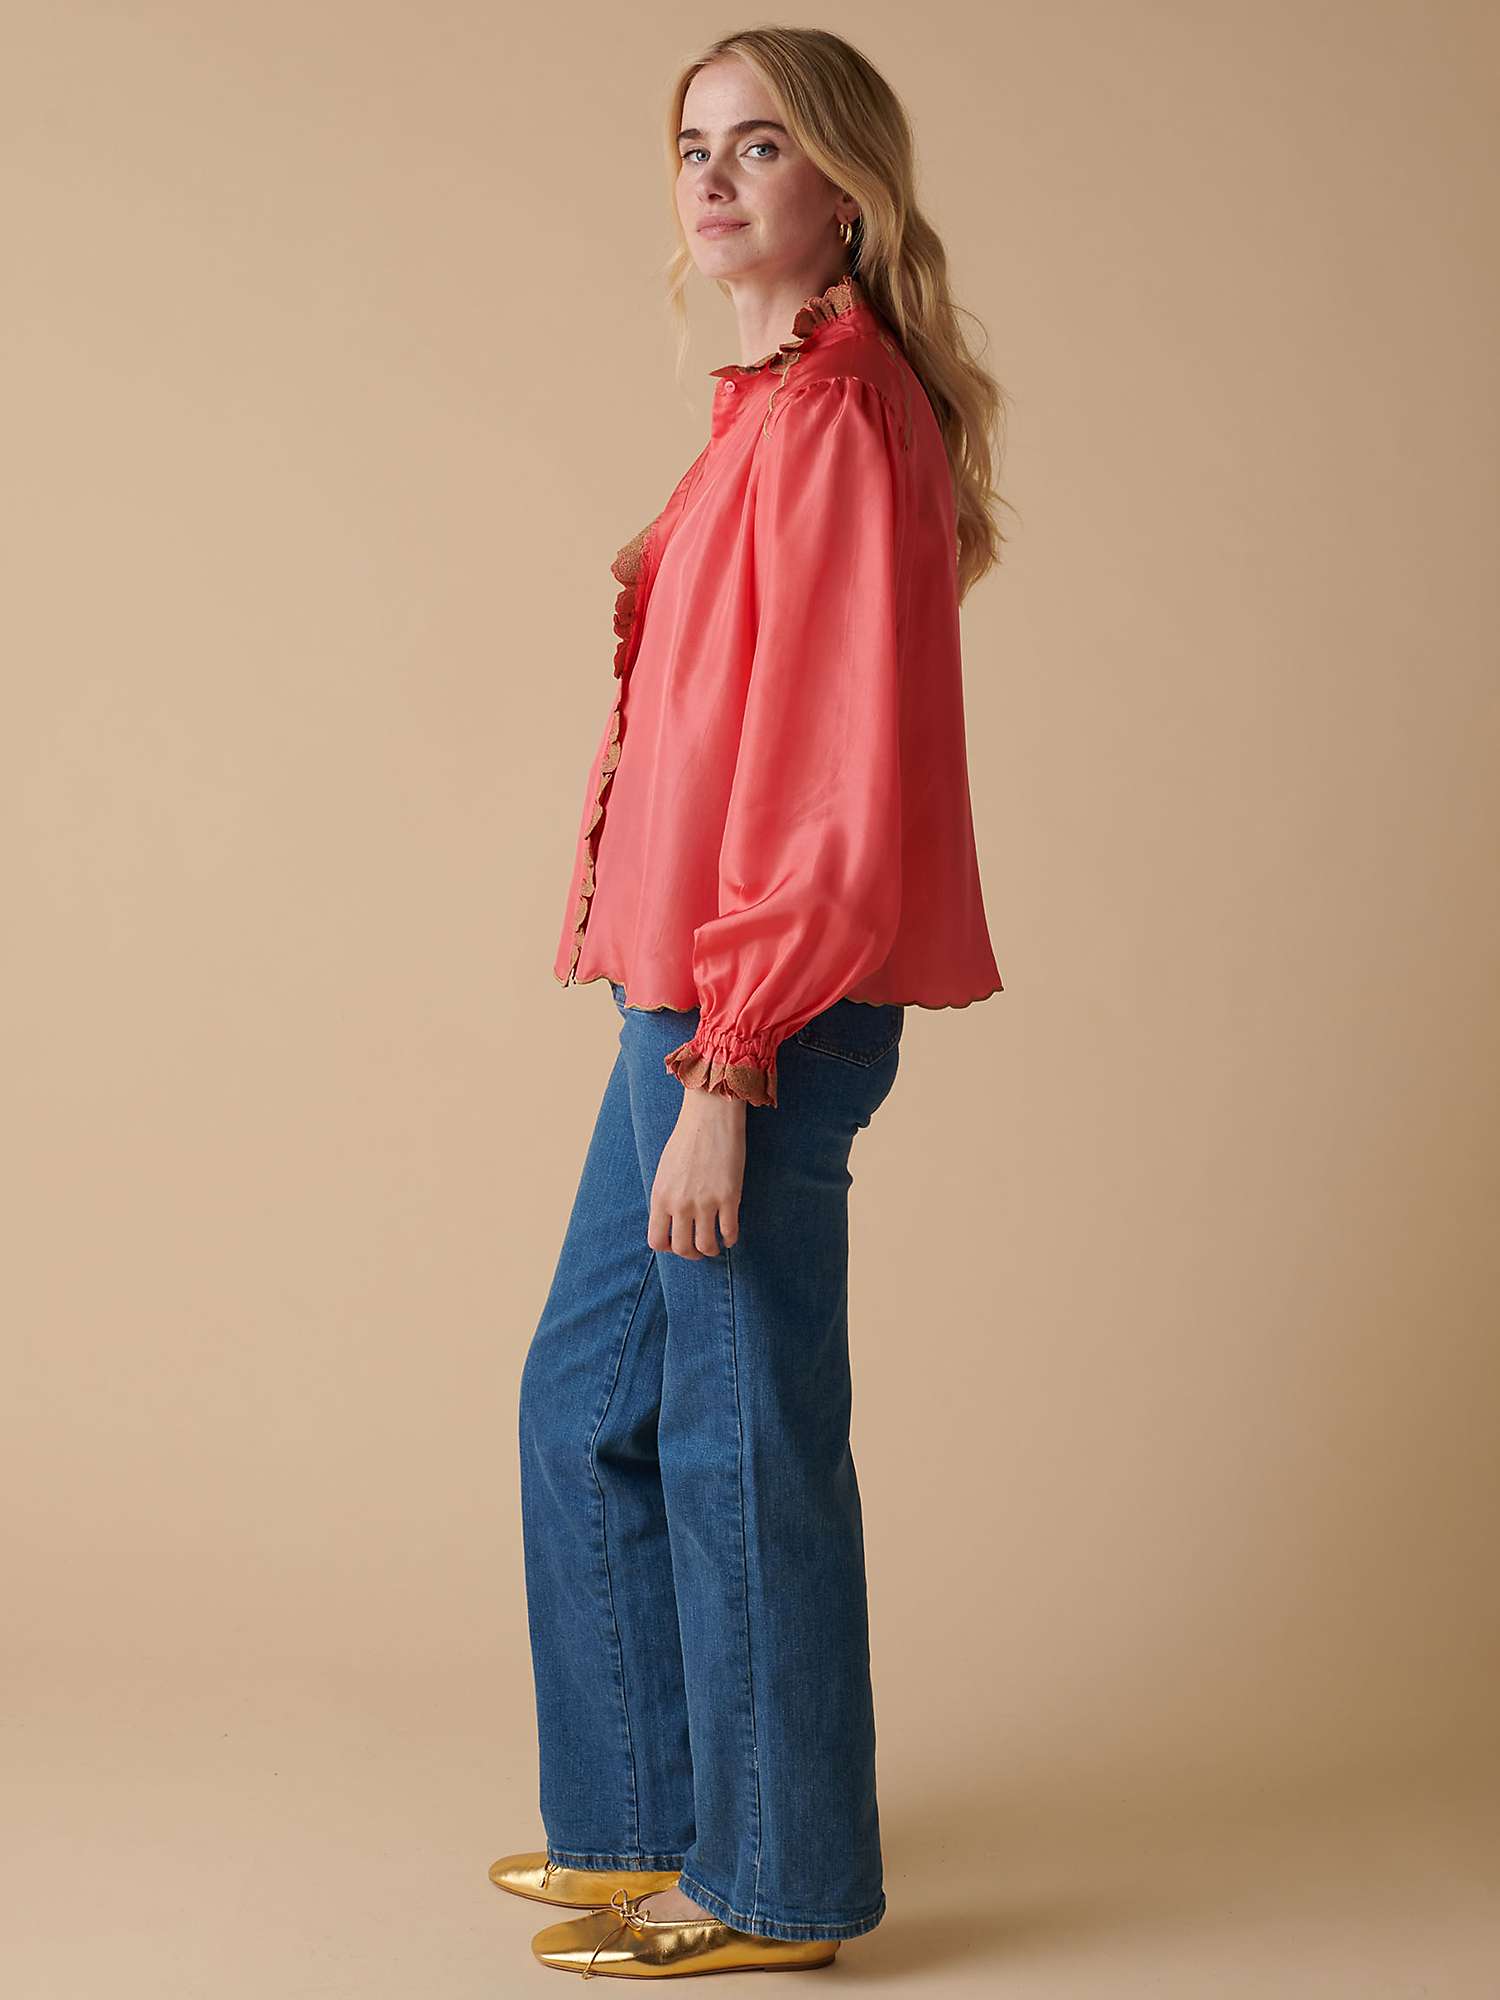 Buy Cape Cove Silk Embroidered Blouse, Soft Pink Online at johnlewis.com